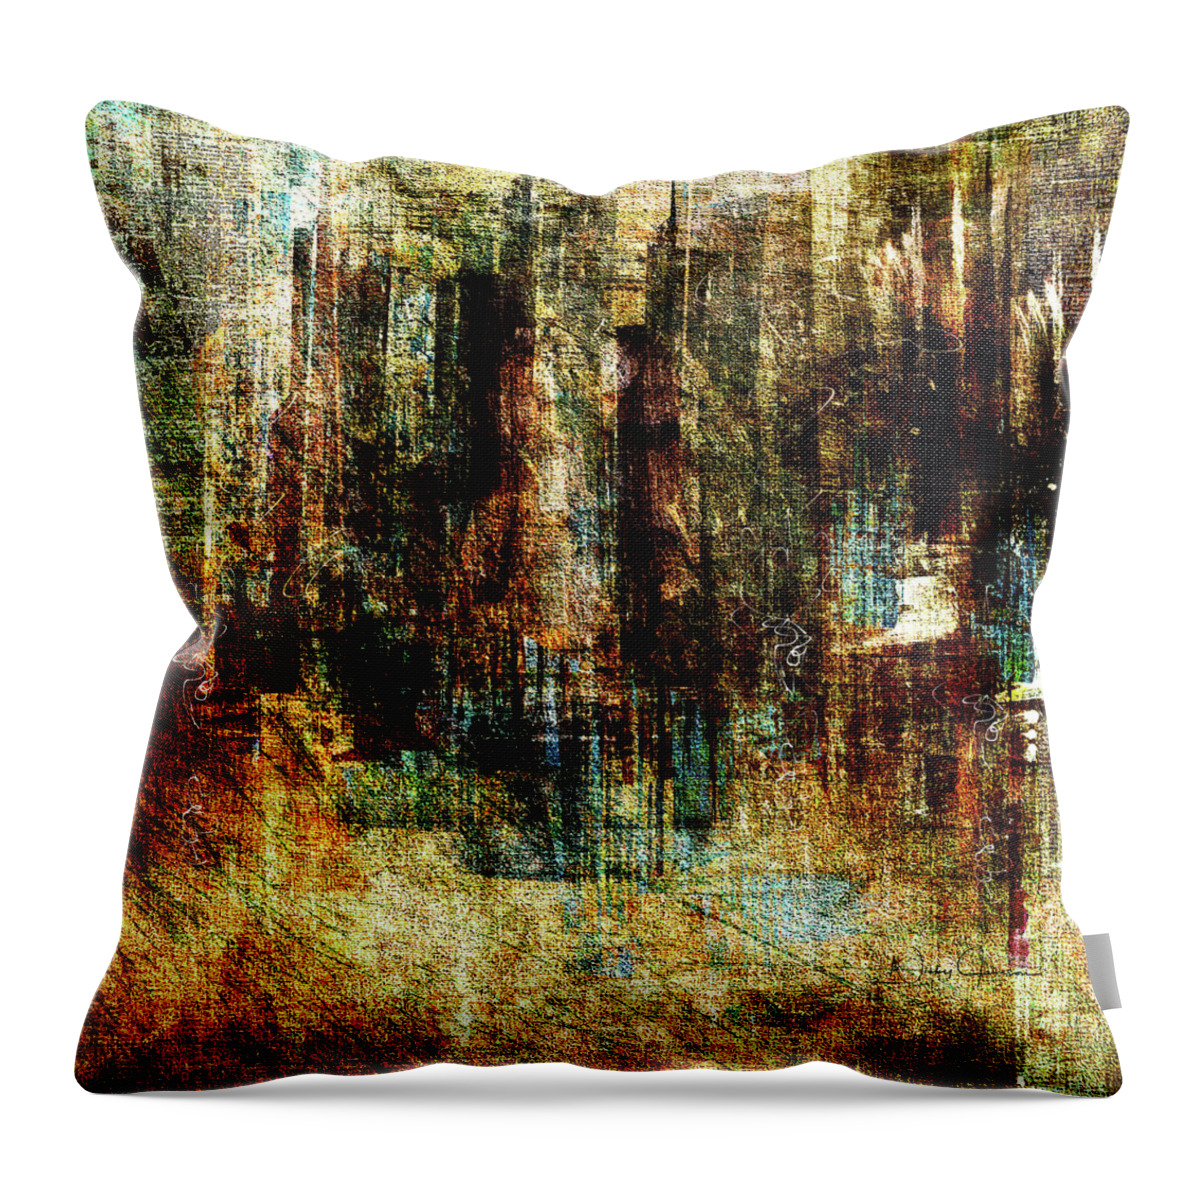 Urban Throw Pillow featuring the digital art Urbanscape Vol 1 by Nicky Jameson